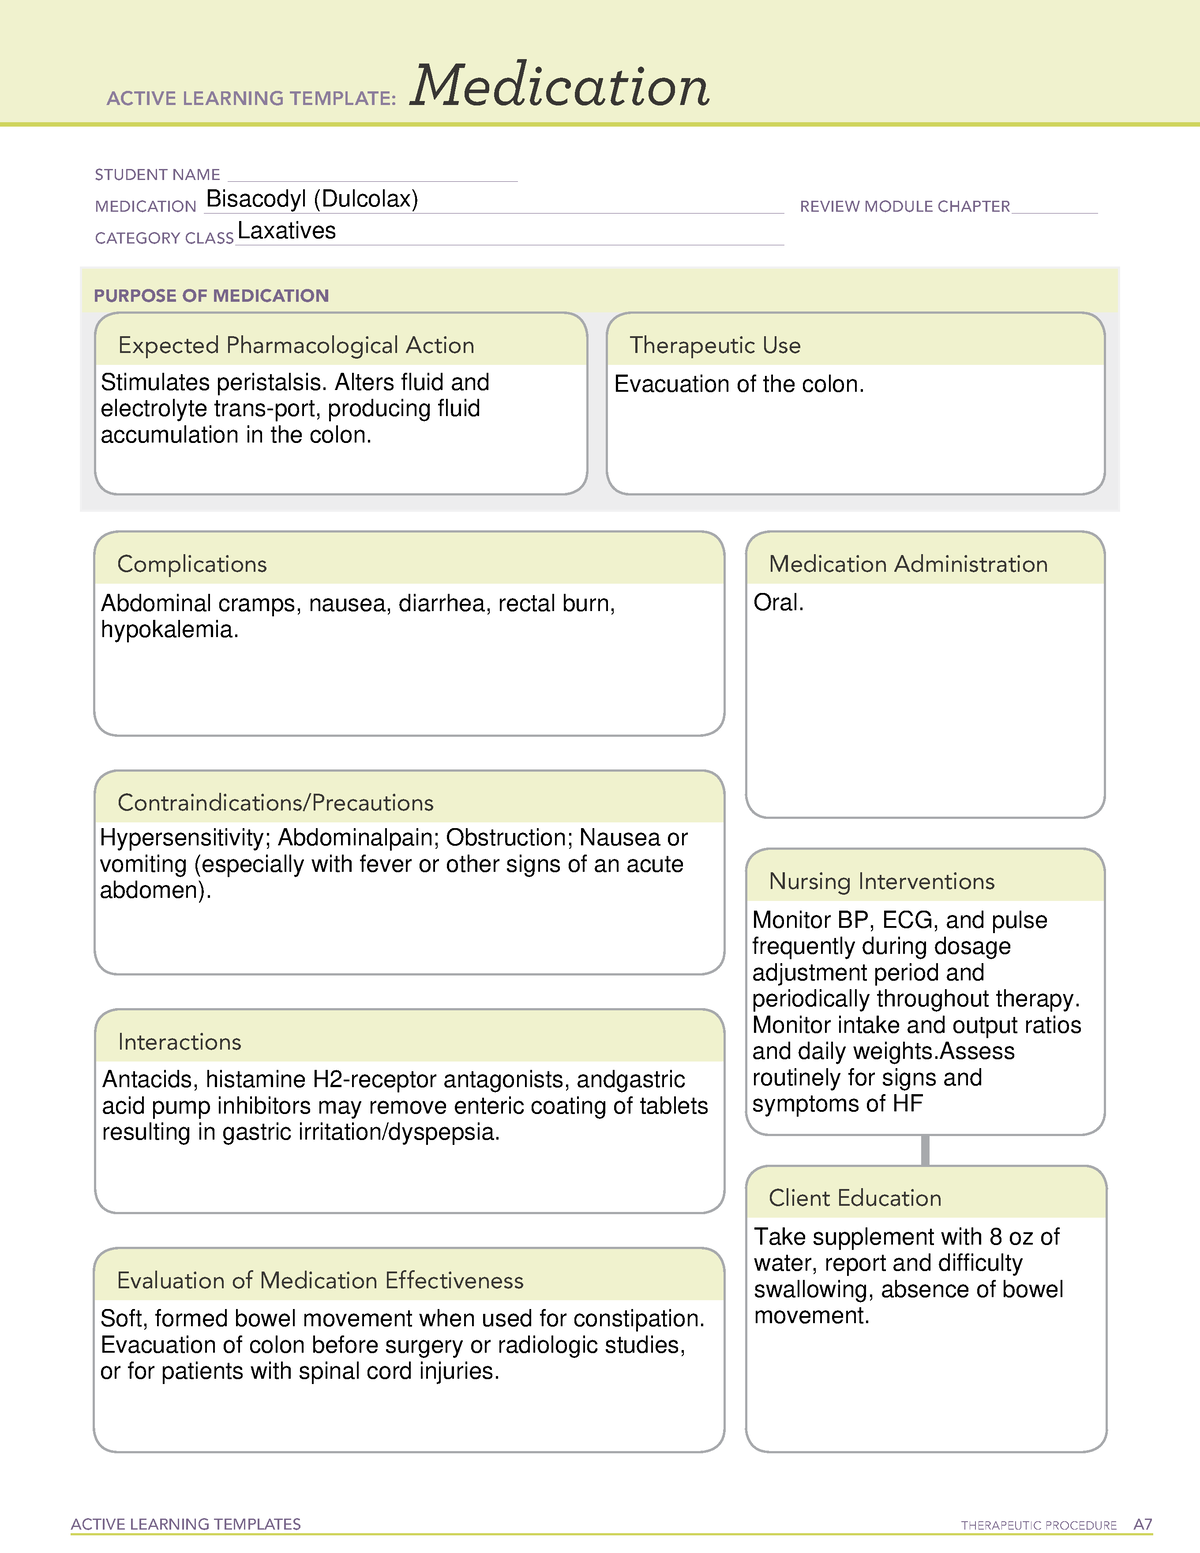 Bisacodyl (Dulcolax) MED LIST ACTIVE LEARNING TEMPLATES THERAPEUTIC